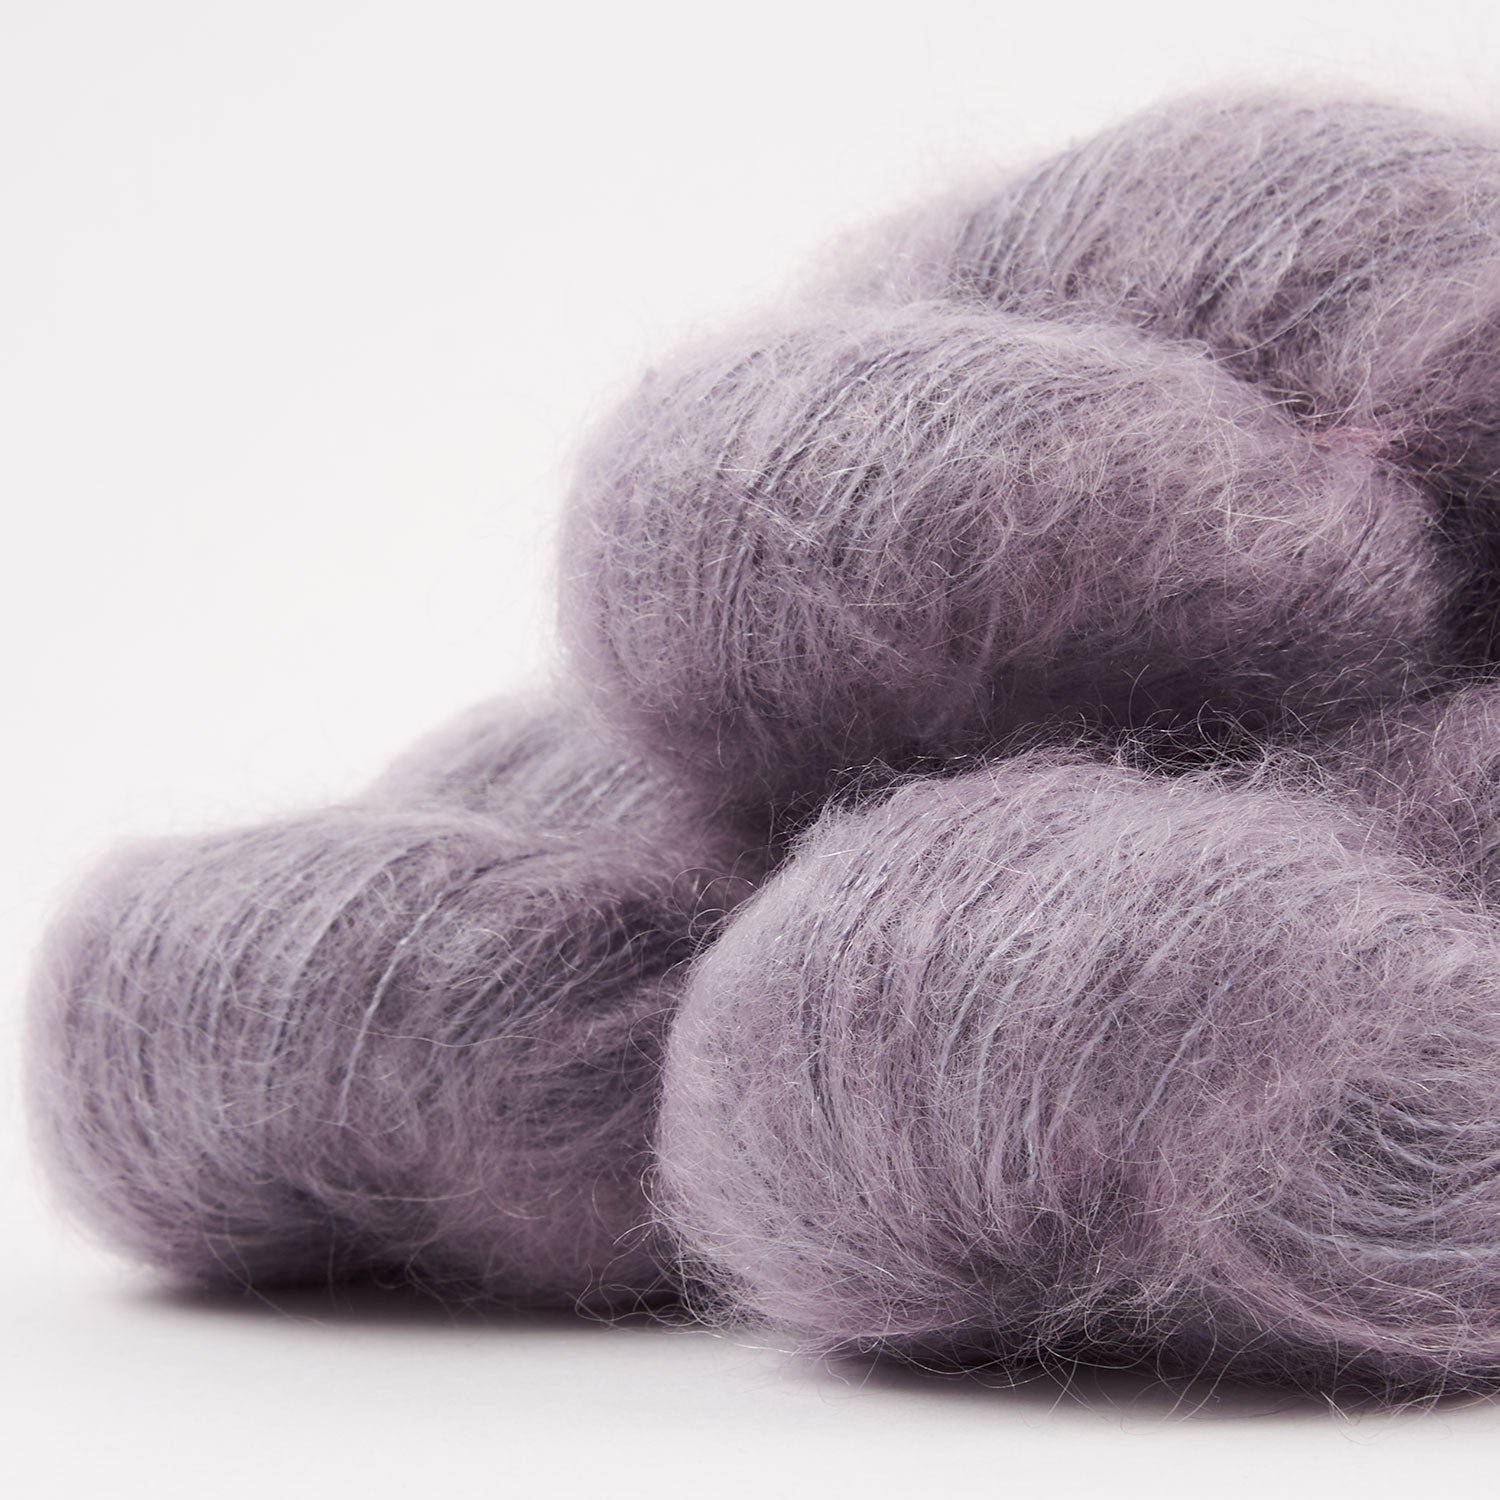 KID MOHAIR LACE - SMOKY